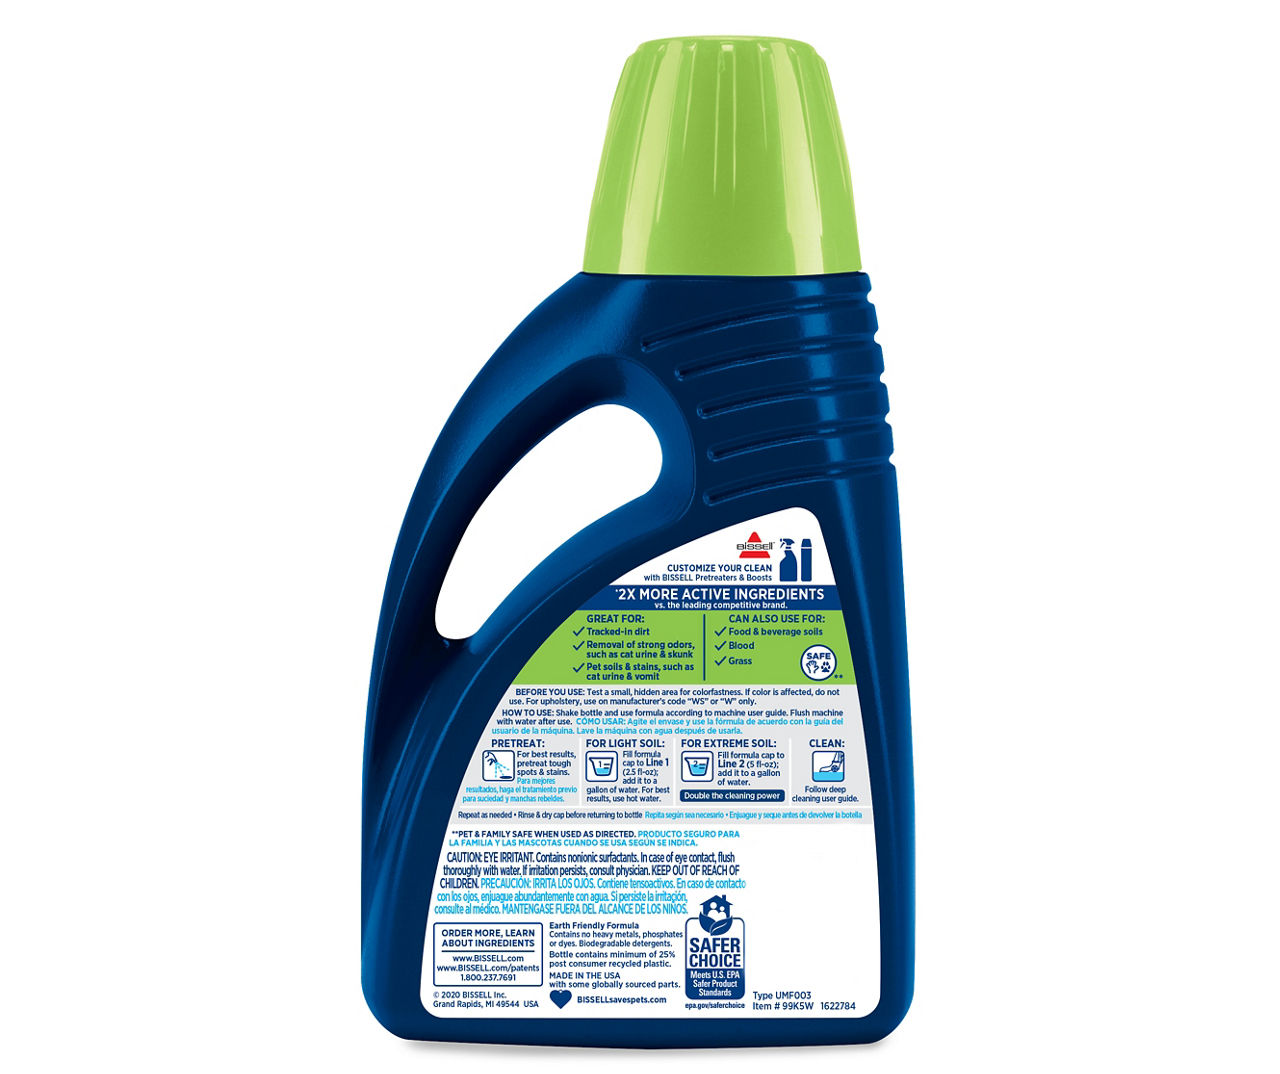 BISSELL WASH & PROTECT CARPET PET STAIN & ODOUR CLEANING FORMULA